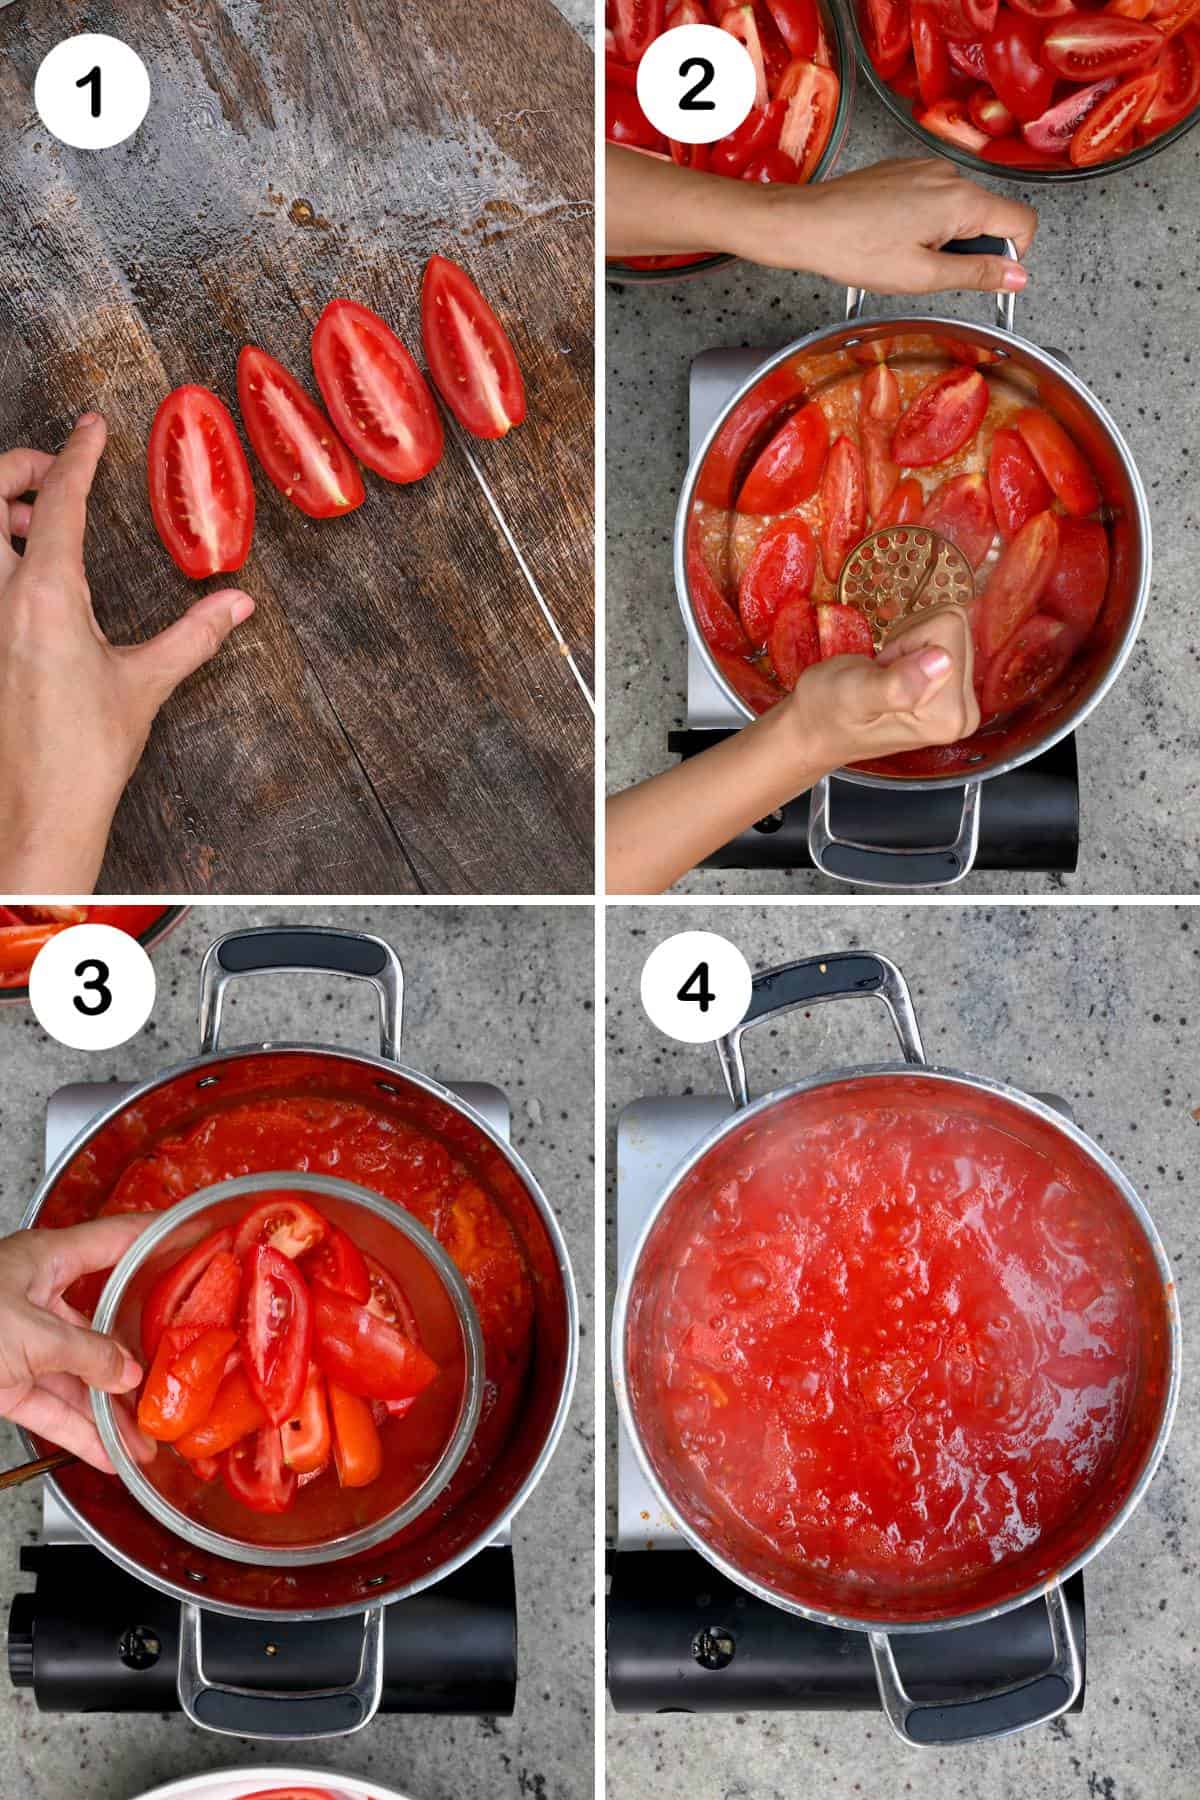 steps for chopping and boiling tomato juice